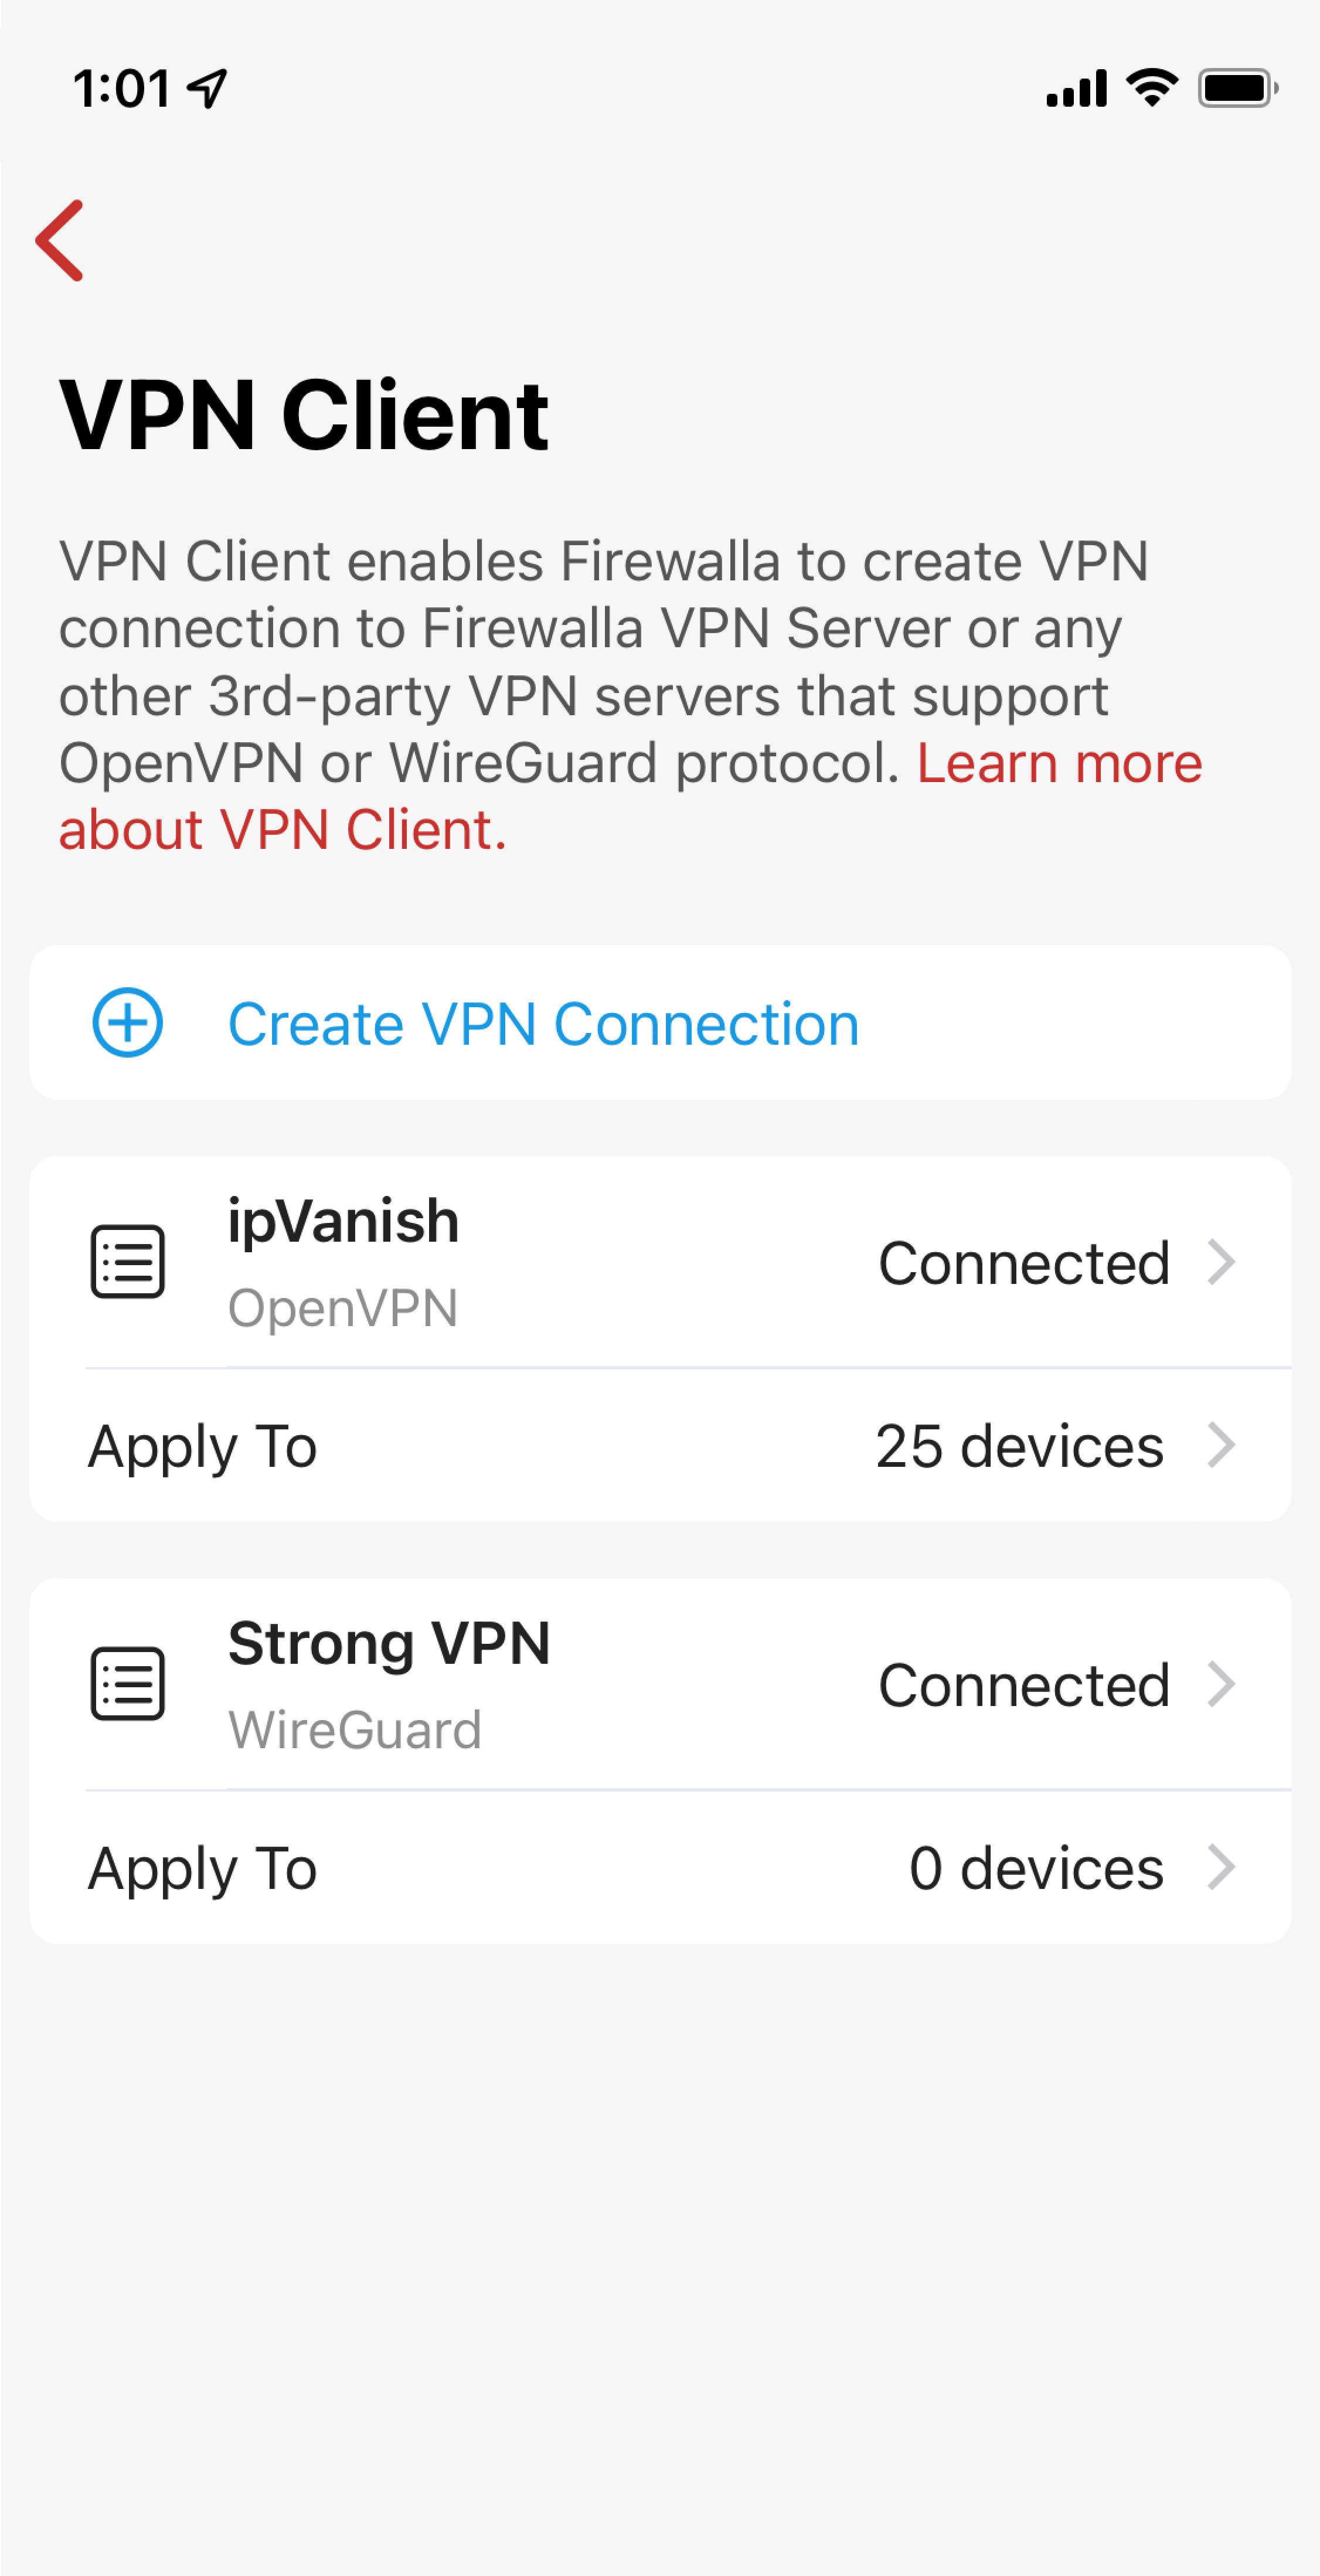 Route device traffic by setting VPN to apply to all devices